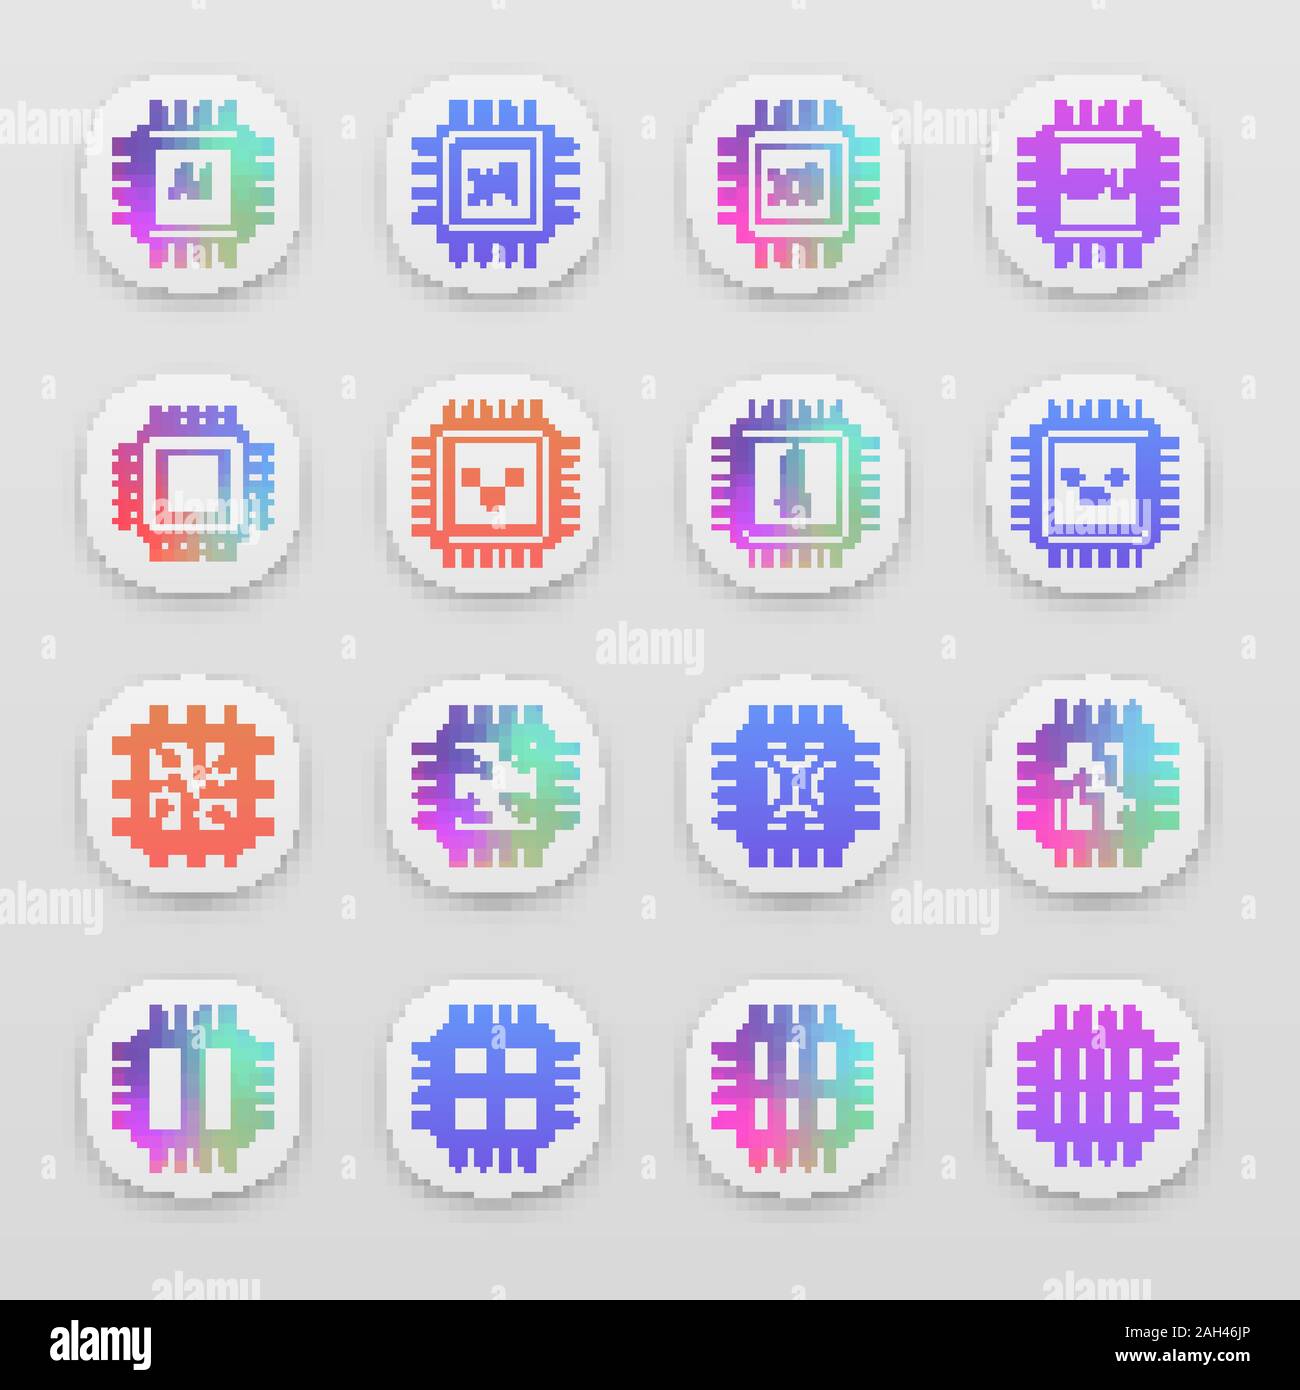 Processors app icons set. Multi-core processors. Chips, microchips, chipsets. CPU. Central processing units. Integrated circuits. UI/UX user interface Stock Vector